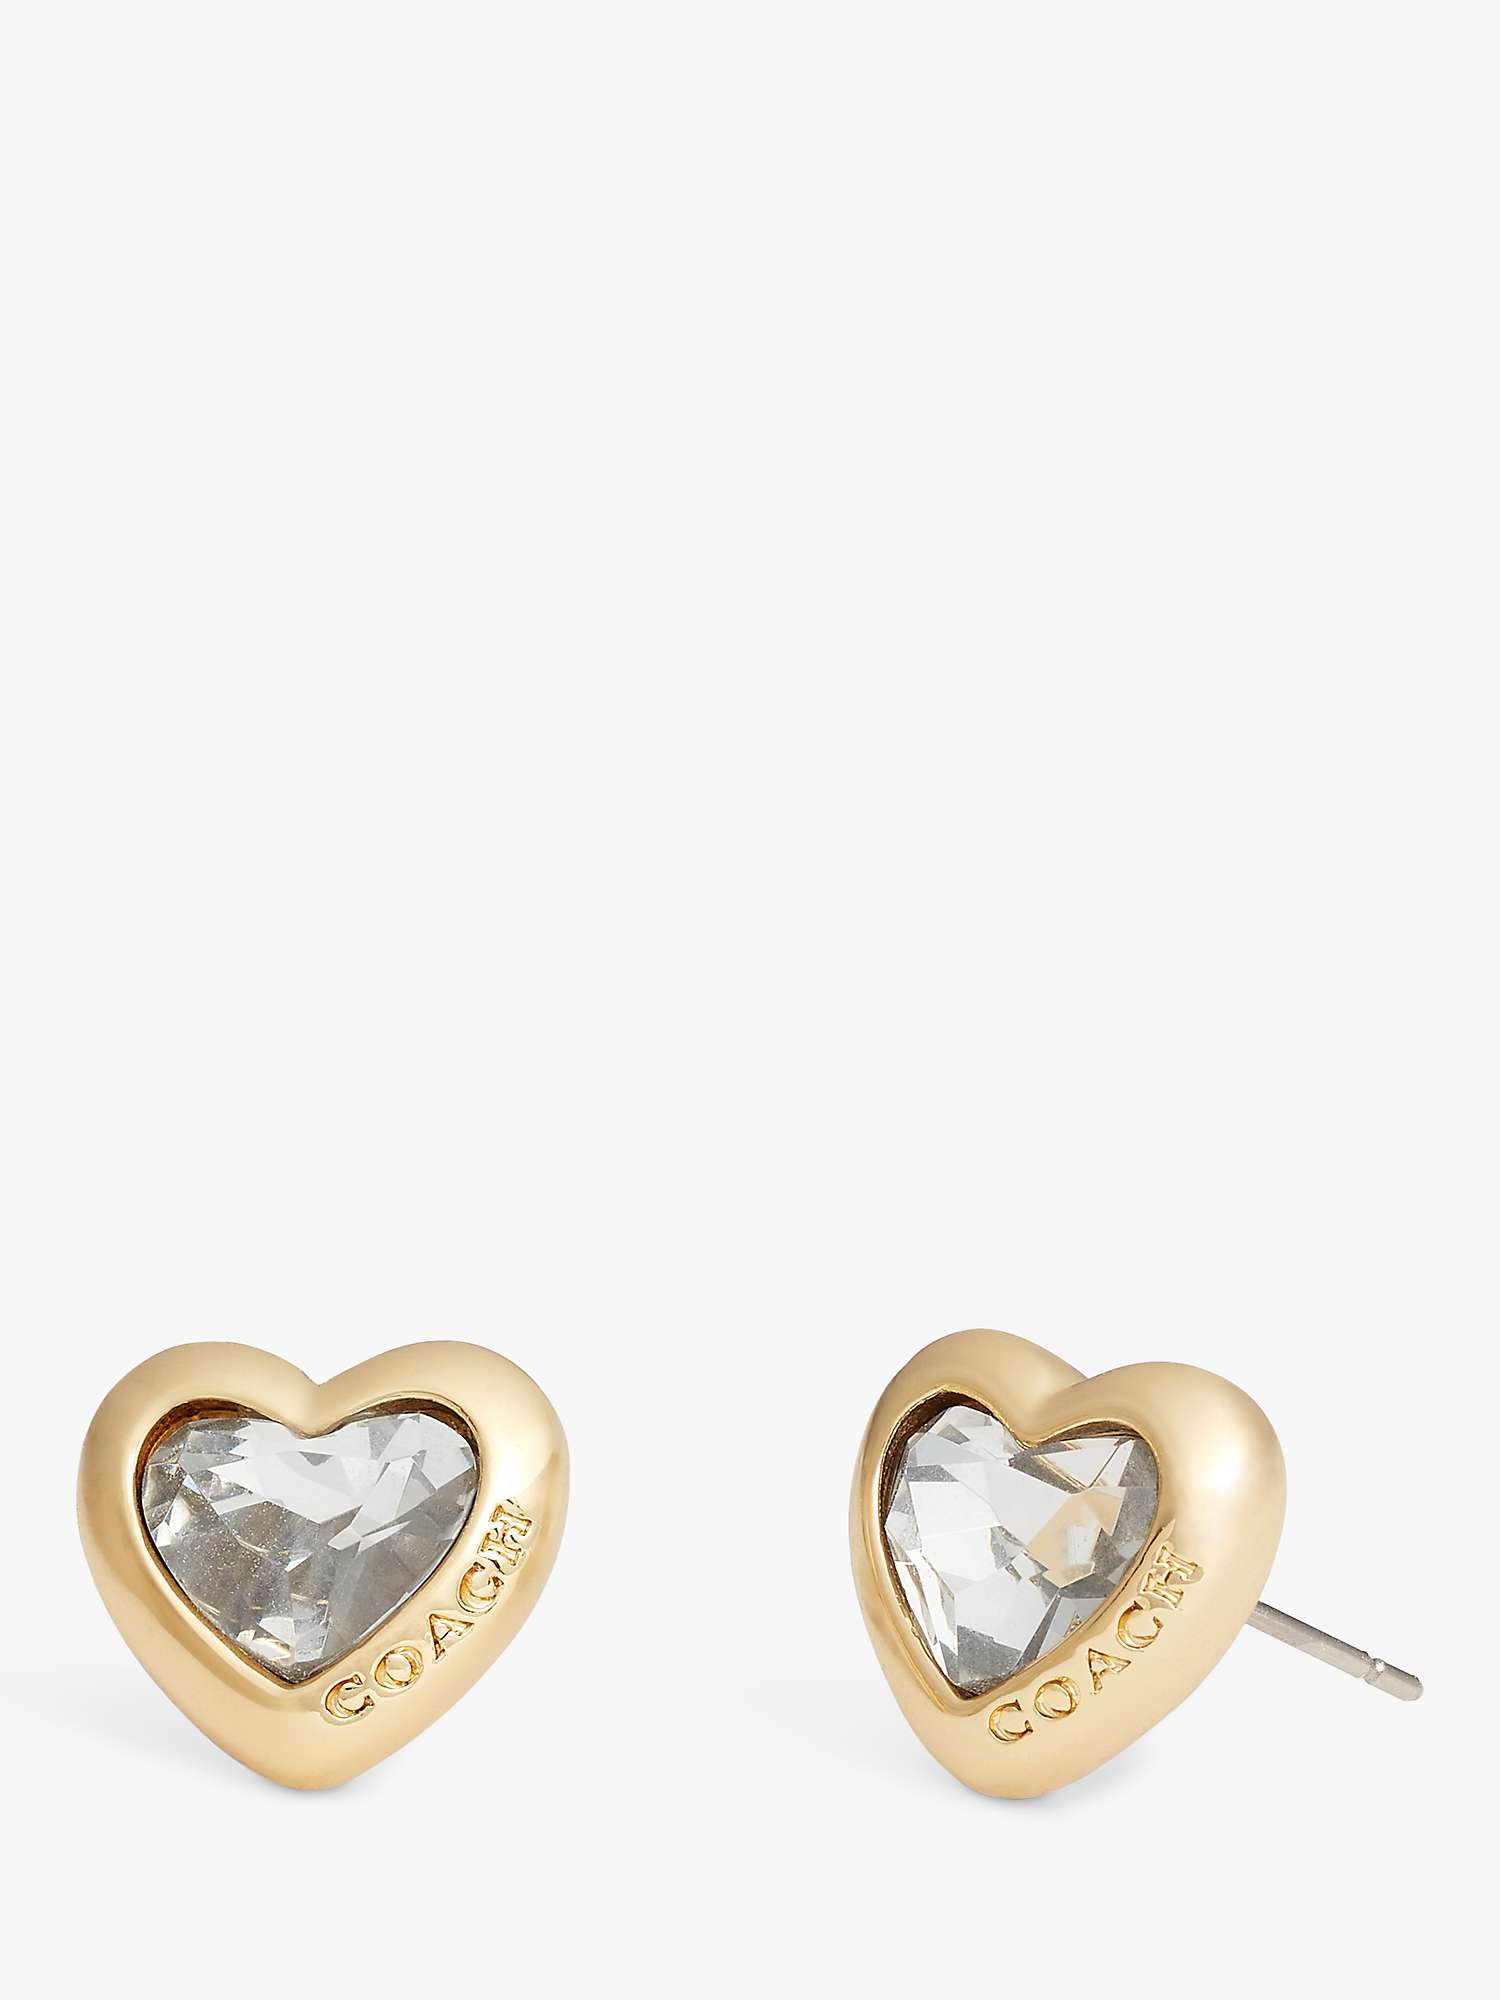 Buy Coach Crystal Heart Logo Stud Earrings, Gold/Clear Online at johnlewis.com